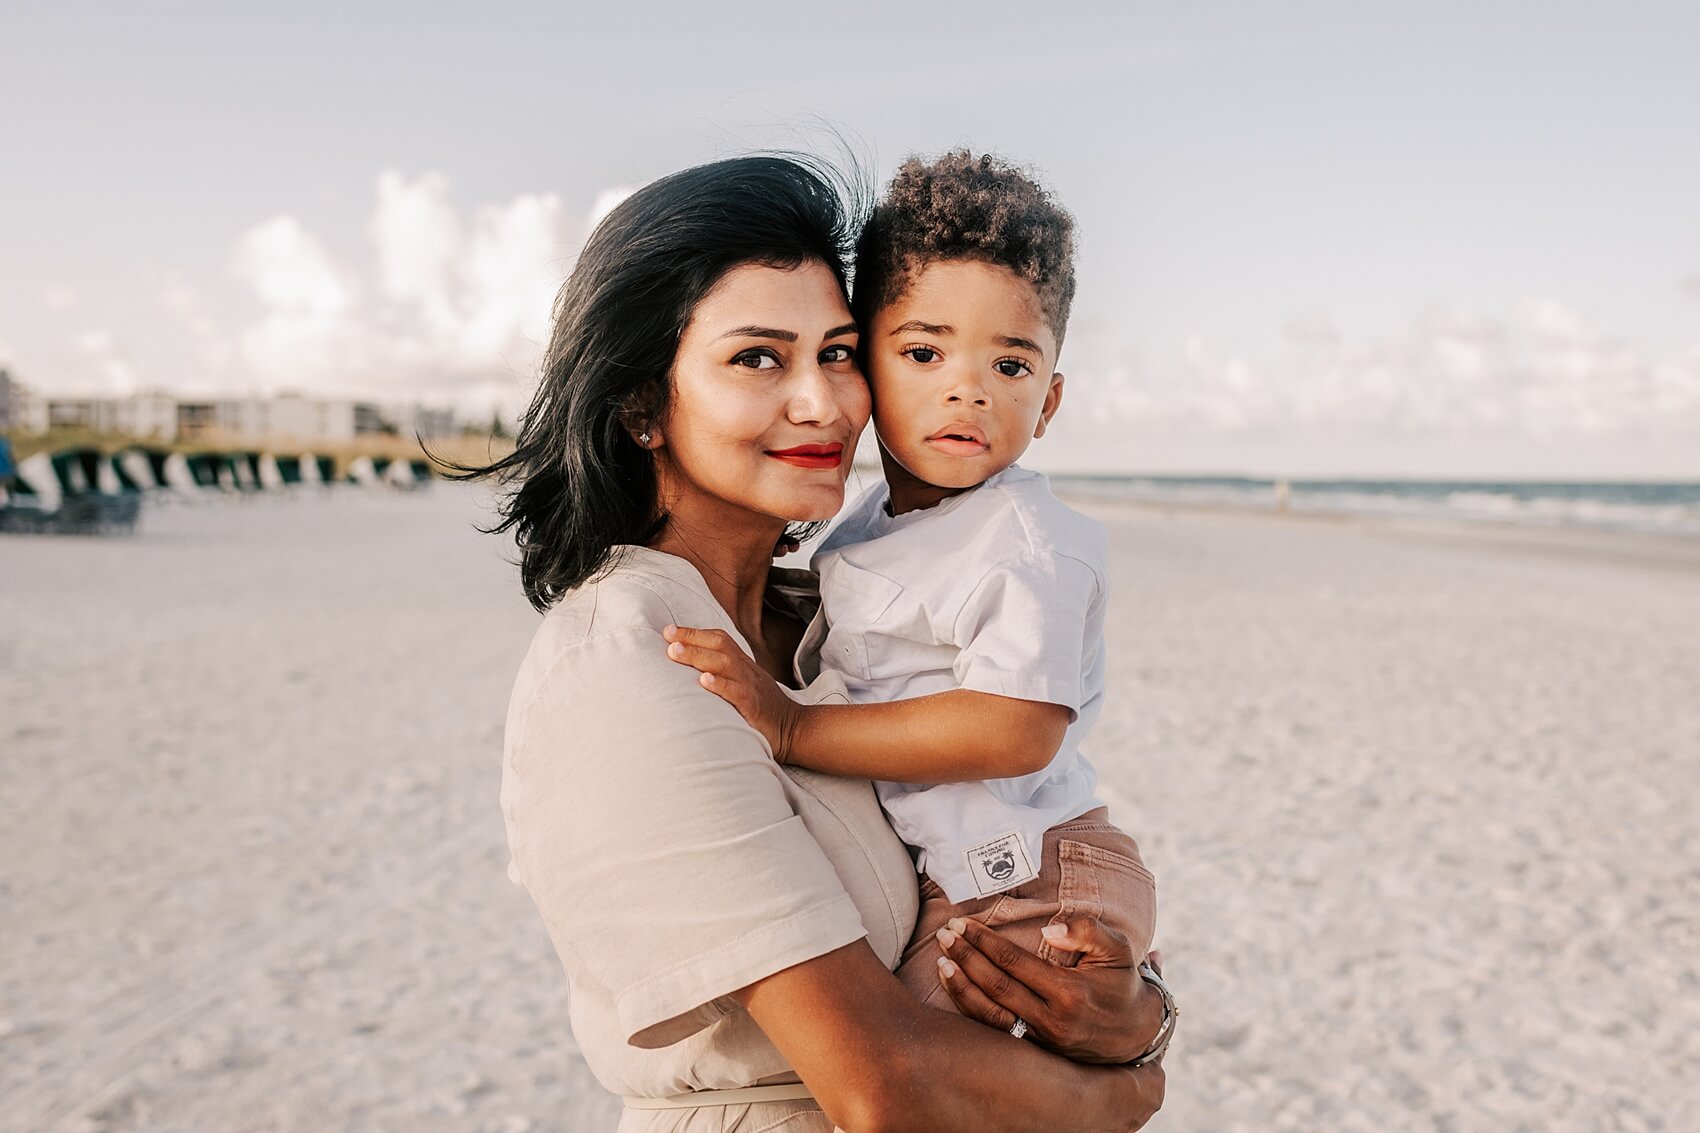 A mother in a beige dress stands on a beach holding her toddler son in a white shirt and red pants